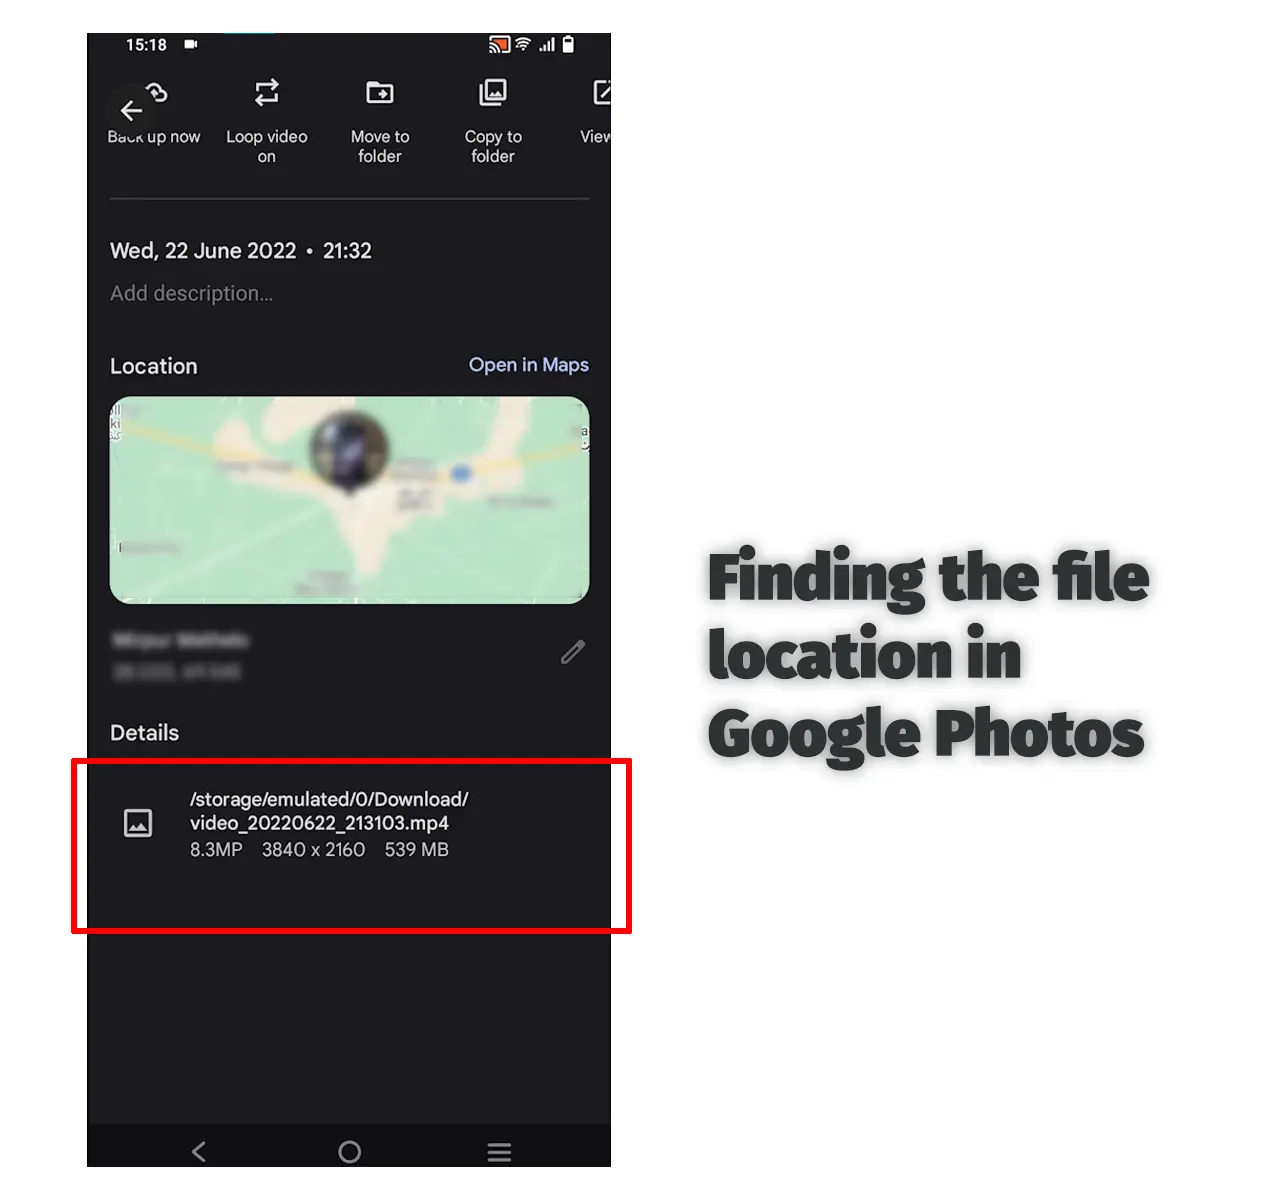 Finding a file location in Google Photos